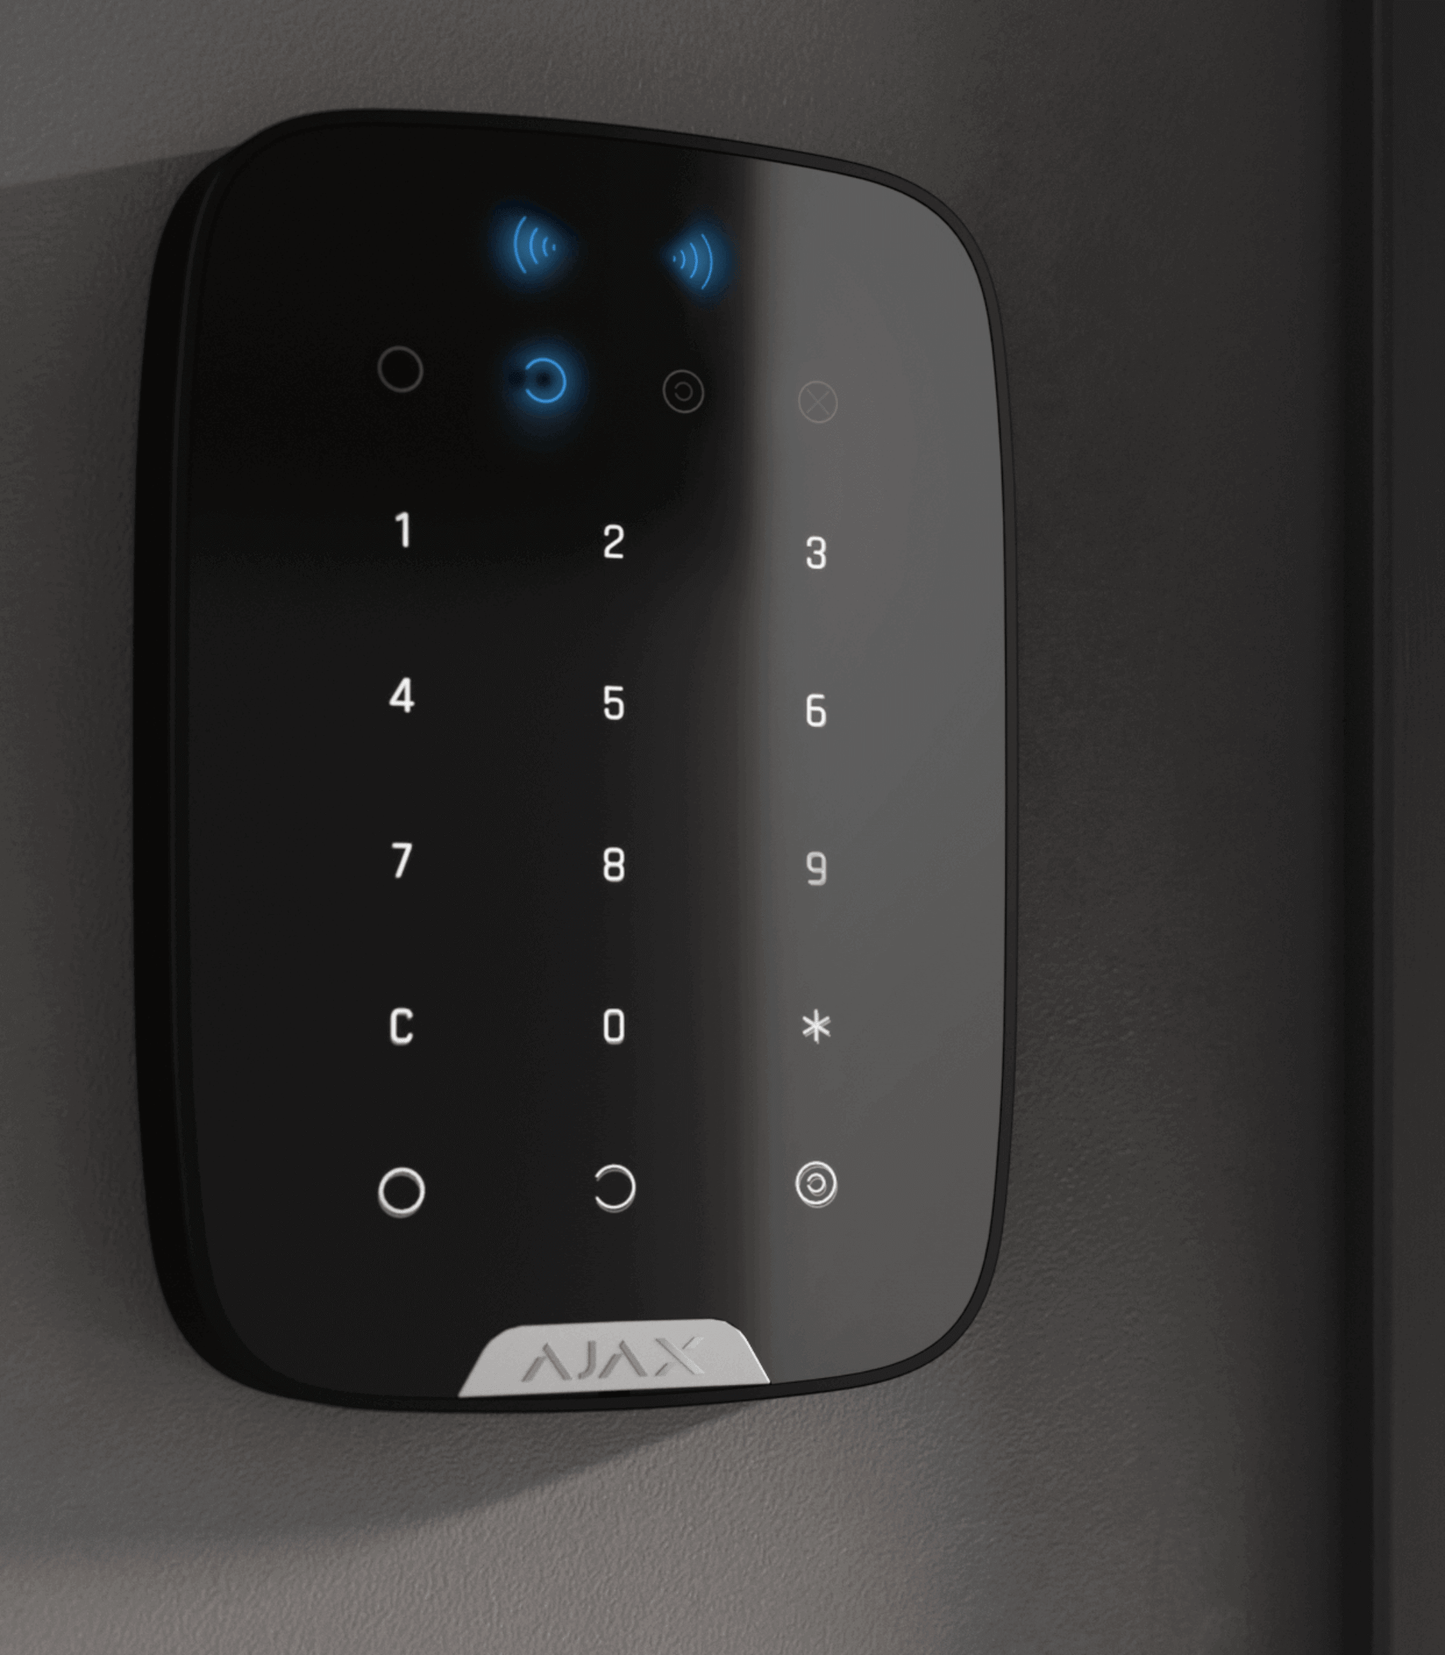 Black Ajax KeyPad Plus a wireless touch keypad mounted on a wall for home security, 165 × 113 × 20 mm in size, 267 grams in weight. used for the the Ajax security system, front view of device